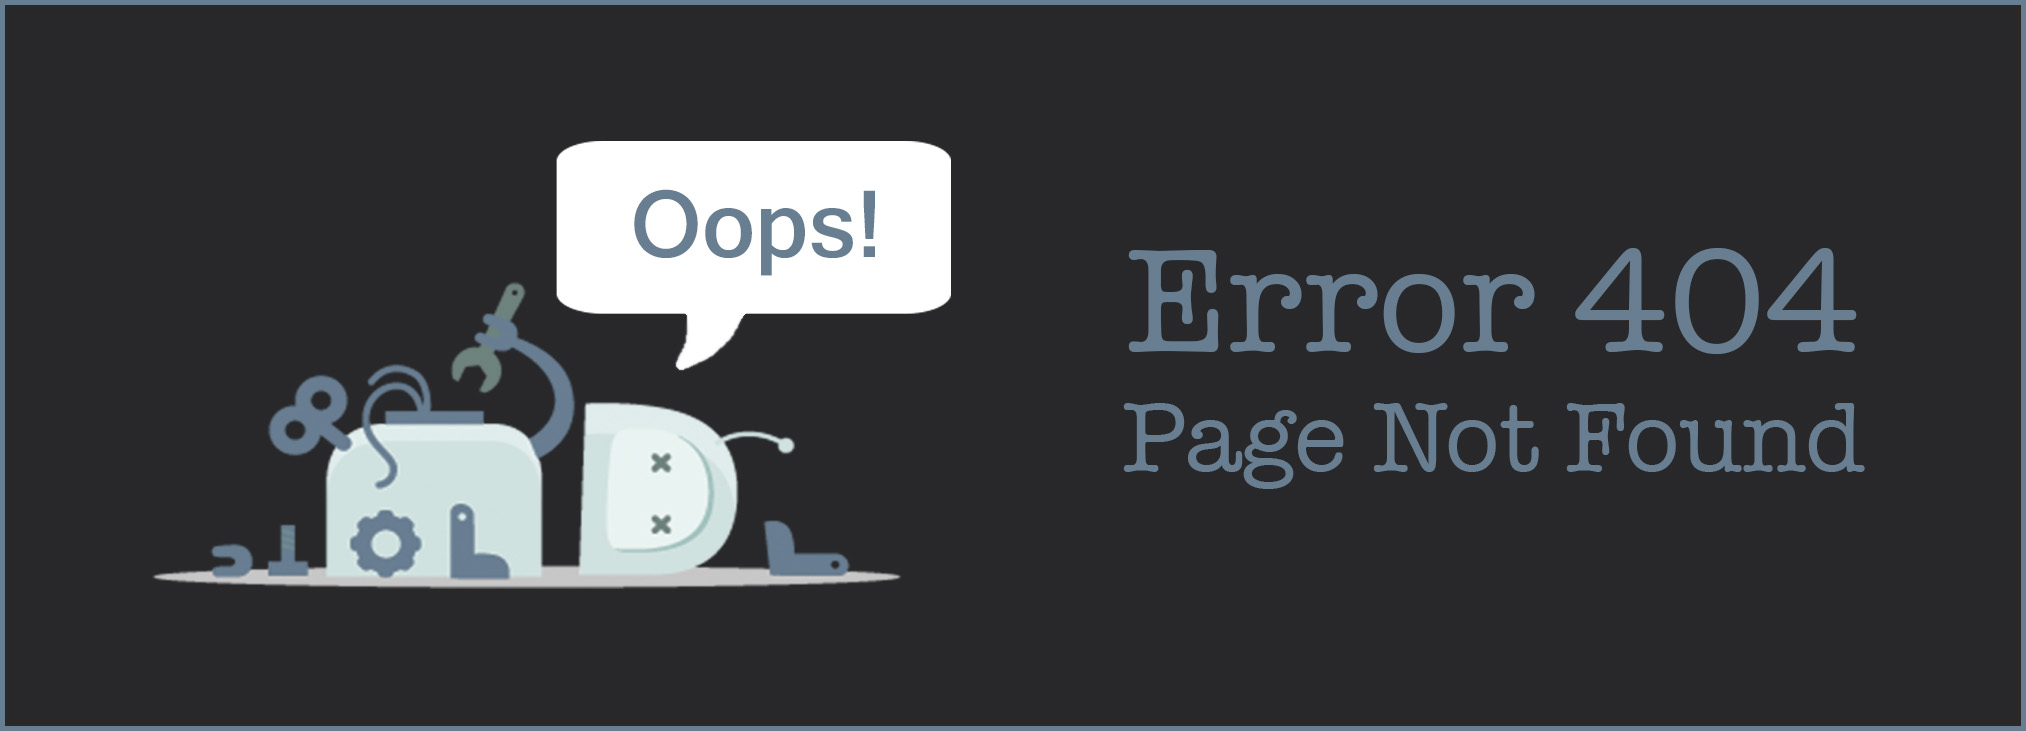 Oops!  Error 404.  Page not found.